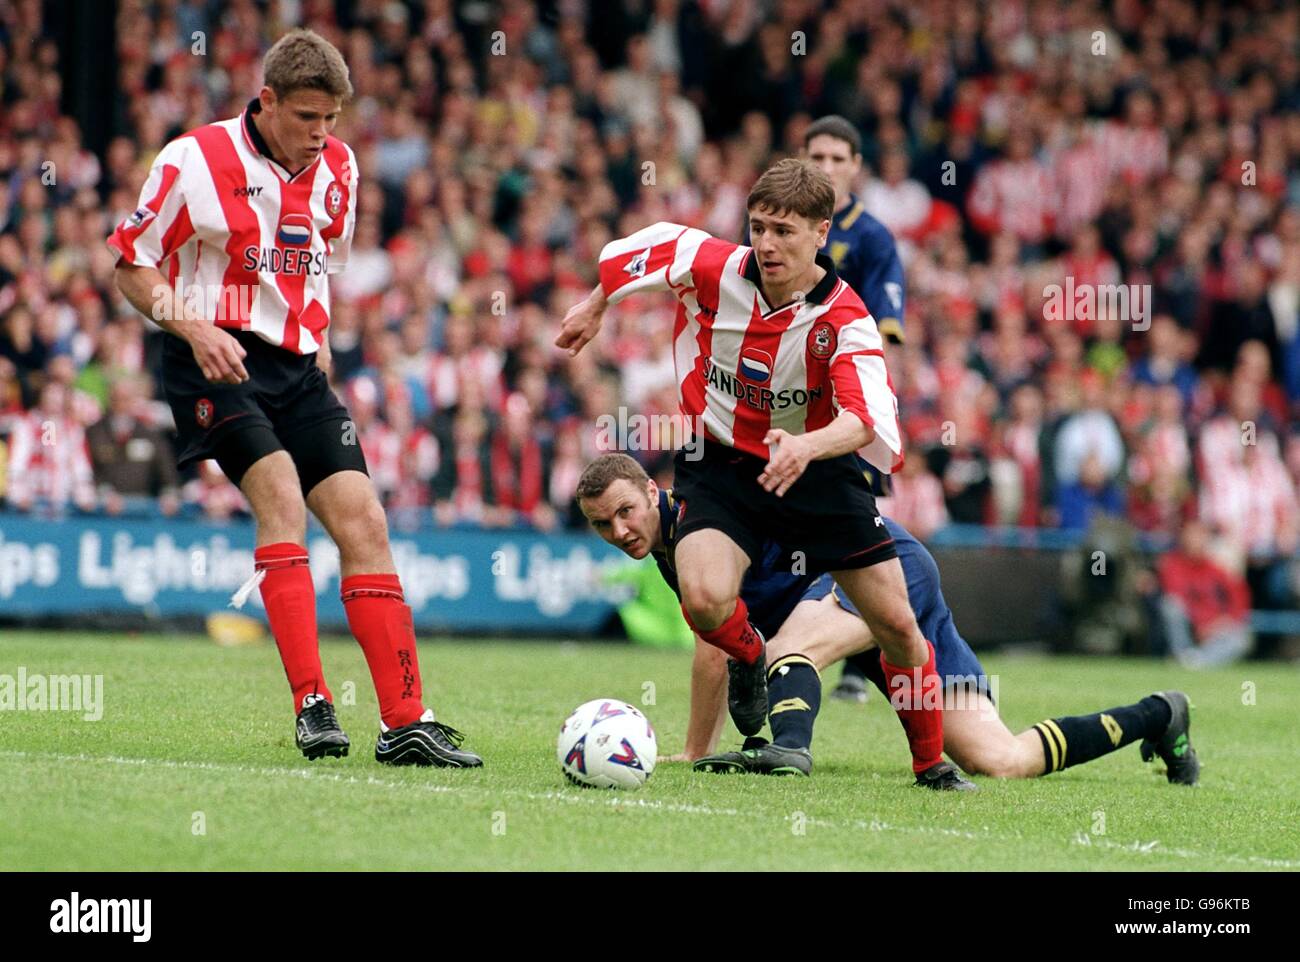 Southampton's Marians Pahars (right) gets away from Wimbledon's Dean Blackwell (on floor) as teammate James Beattie (left) looks on Stock Photo